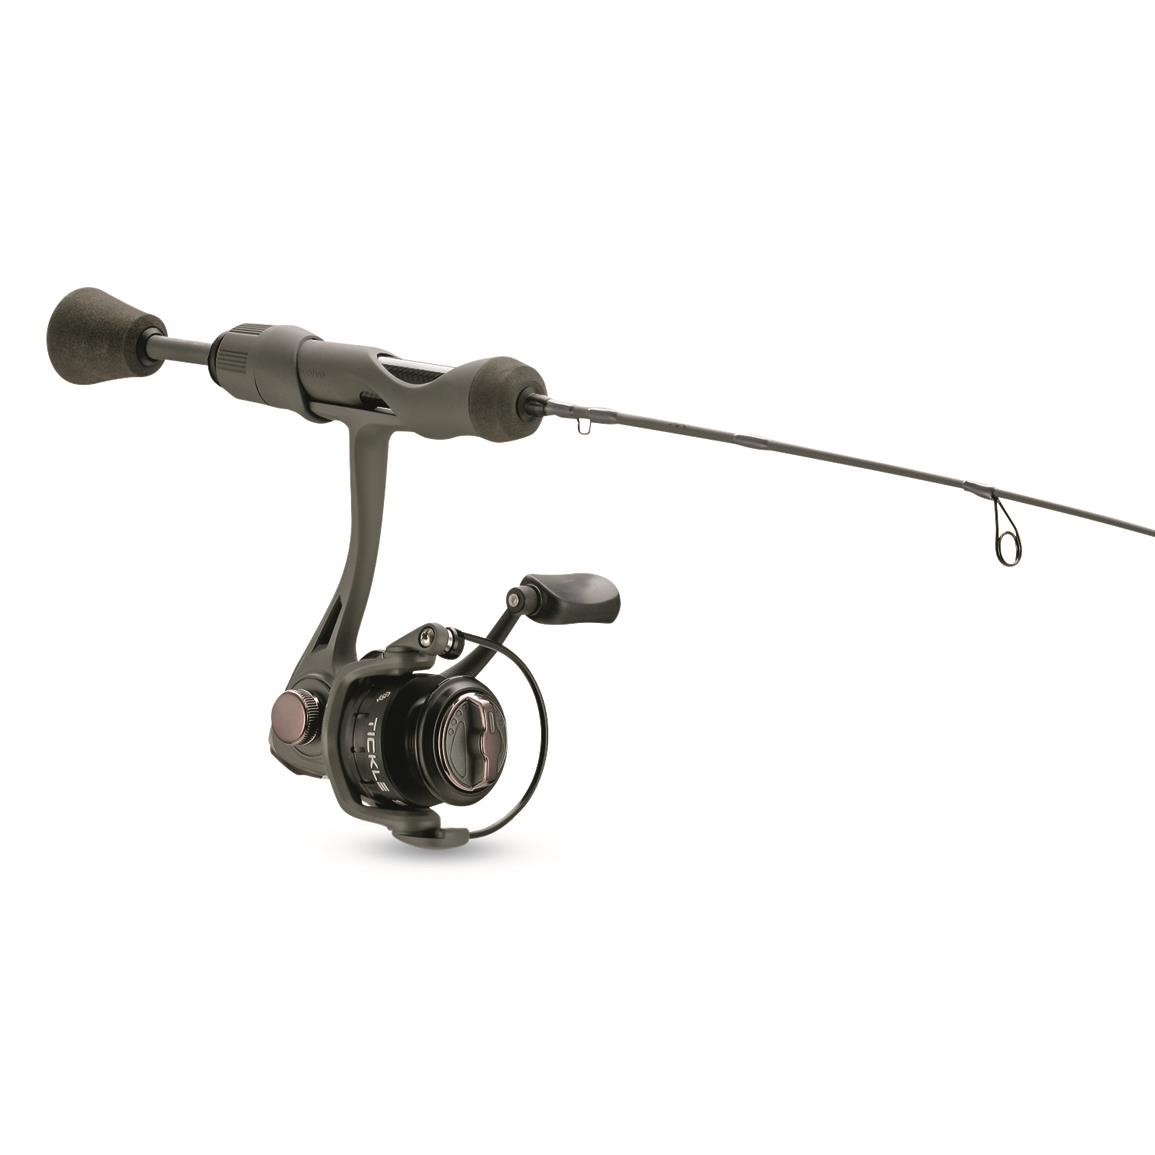 13 Fishing Snitch Pro Ice Fishing Spinning Rod and Reel Combo, 23 Length,  Quick Tip - 728910, Ice Fishing Combos at Sportsman's Guide